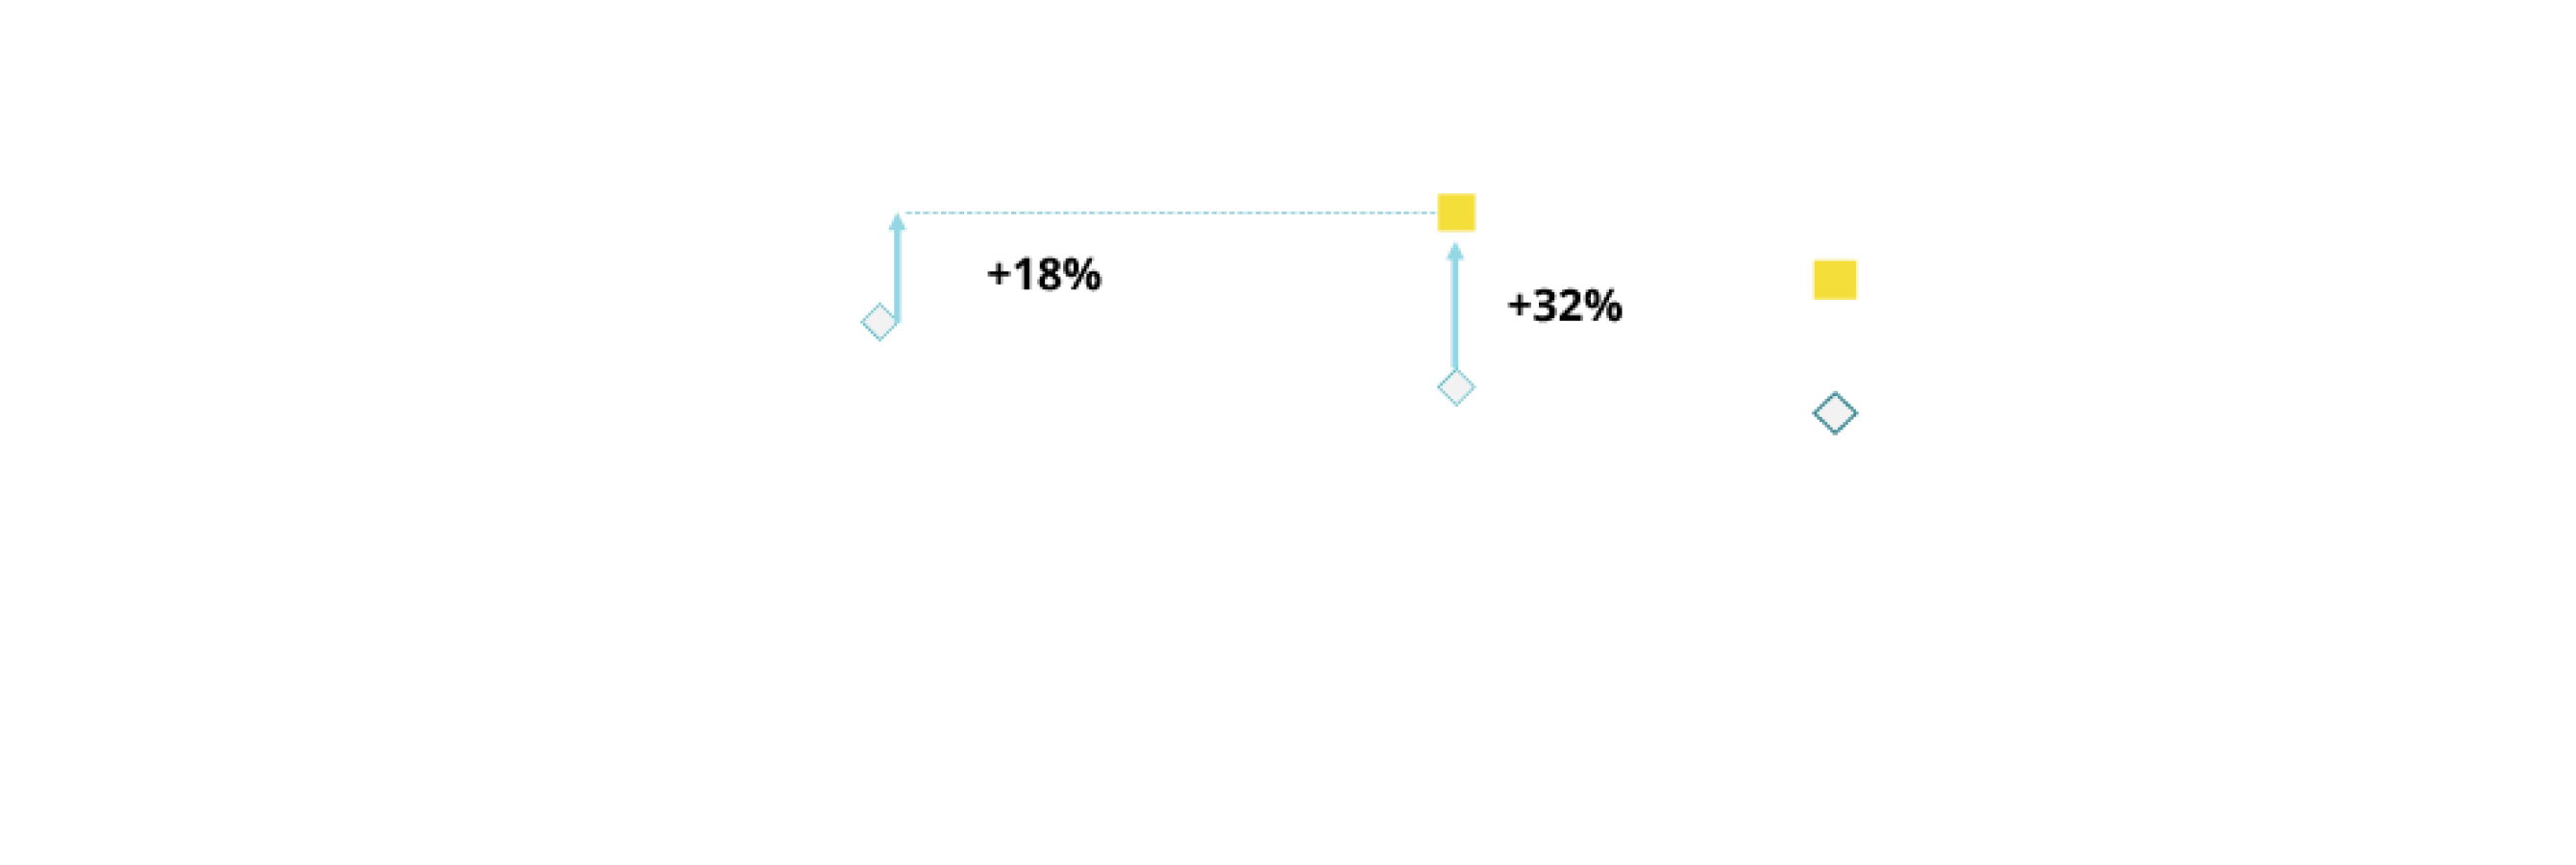 A dot graph comparing the vitreous flow rate of various ULTRAVIT Probes. The 10K 25+ Gauge Advanced ULTRAVIT Probe had a 32% higher flow rate than the 7.5K 25+ Gauge ULTRAVIT Probe, and a 18% higher flow rate than the 7.5K 23 Gauge ULTRAVIT Probe.